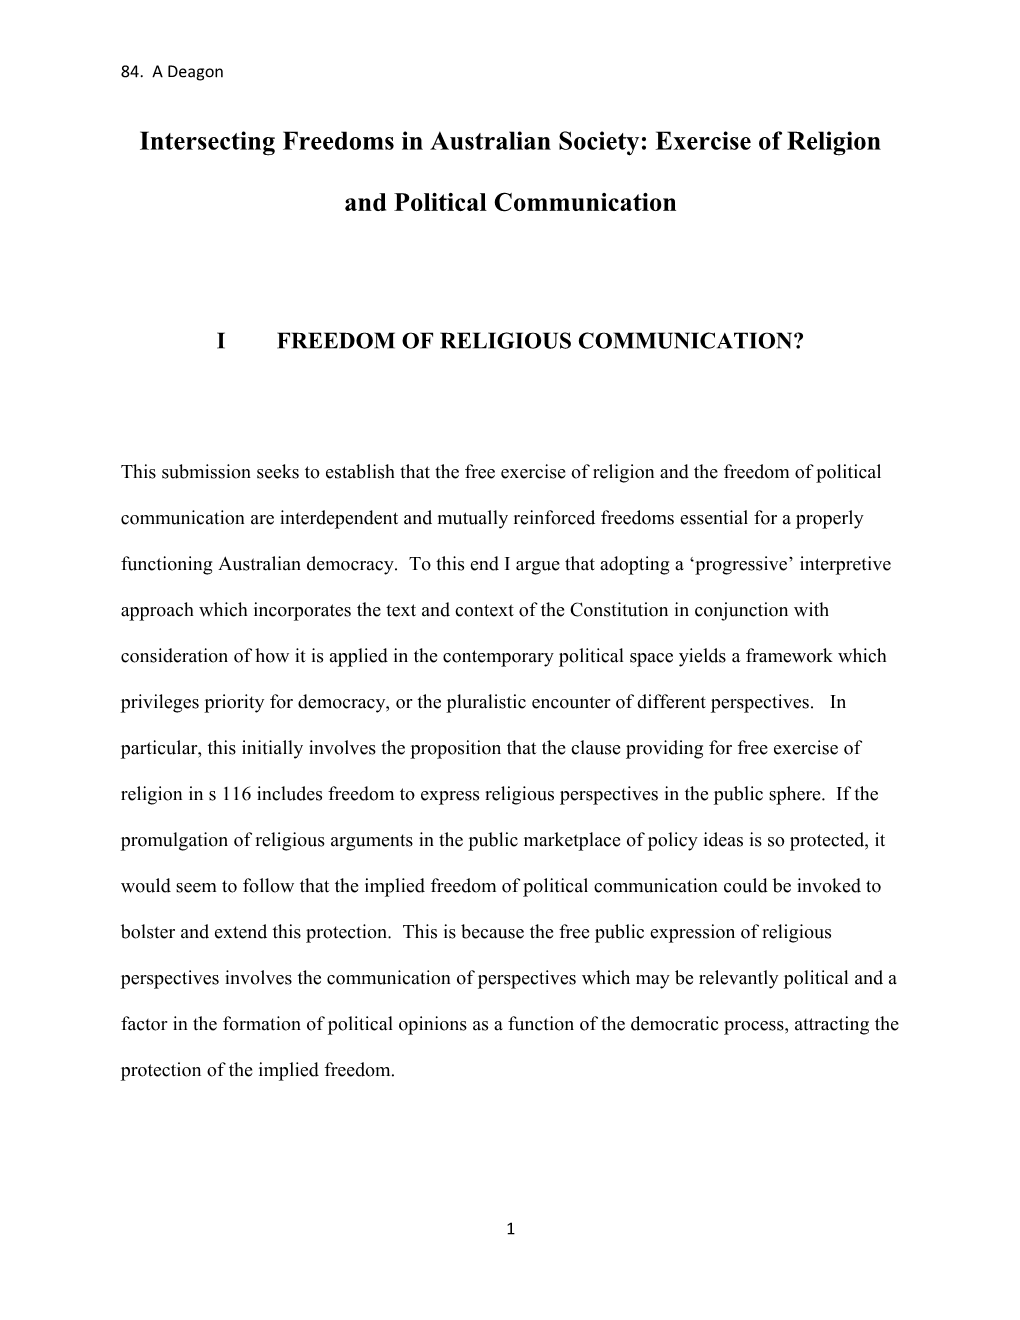 Intersecting Freedoms in Australian Society: Exercise of Religion and Political Communication